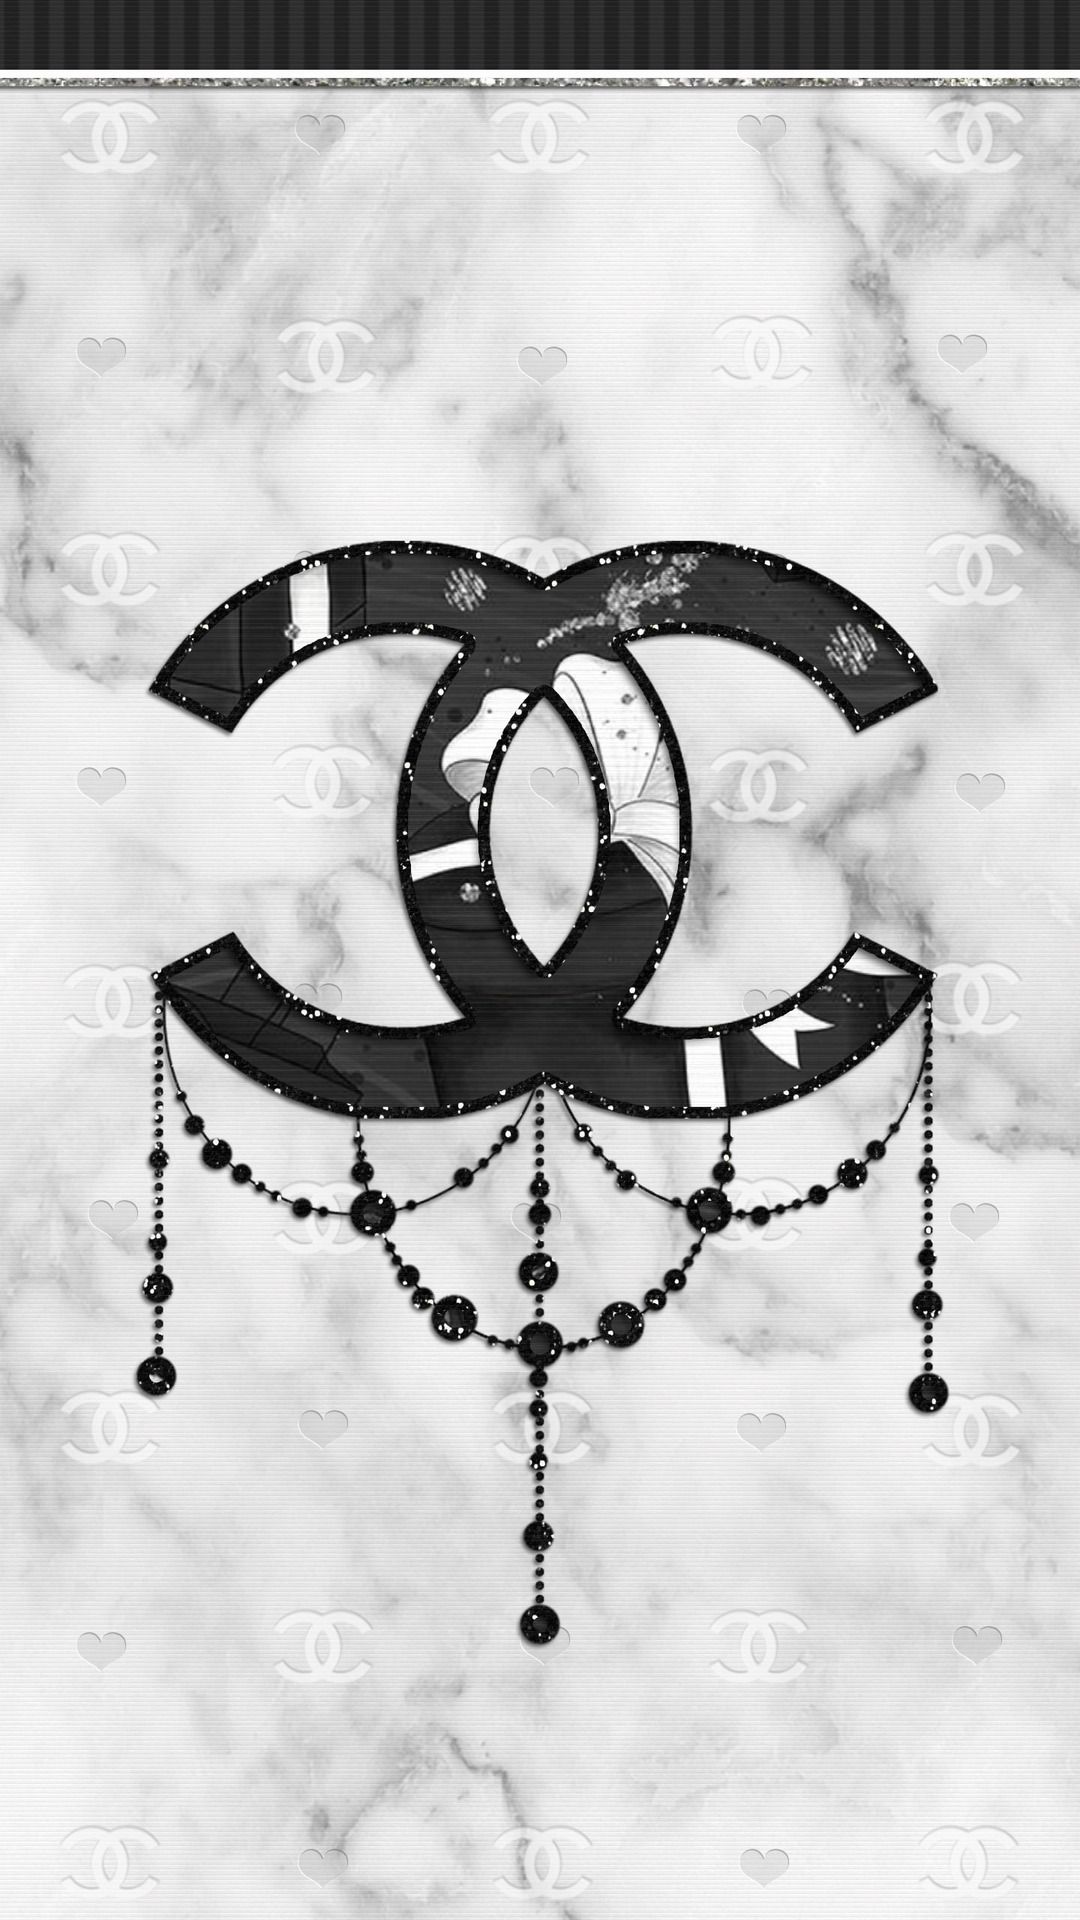 The chanel logo on a marble background - Chanel